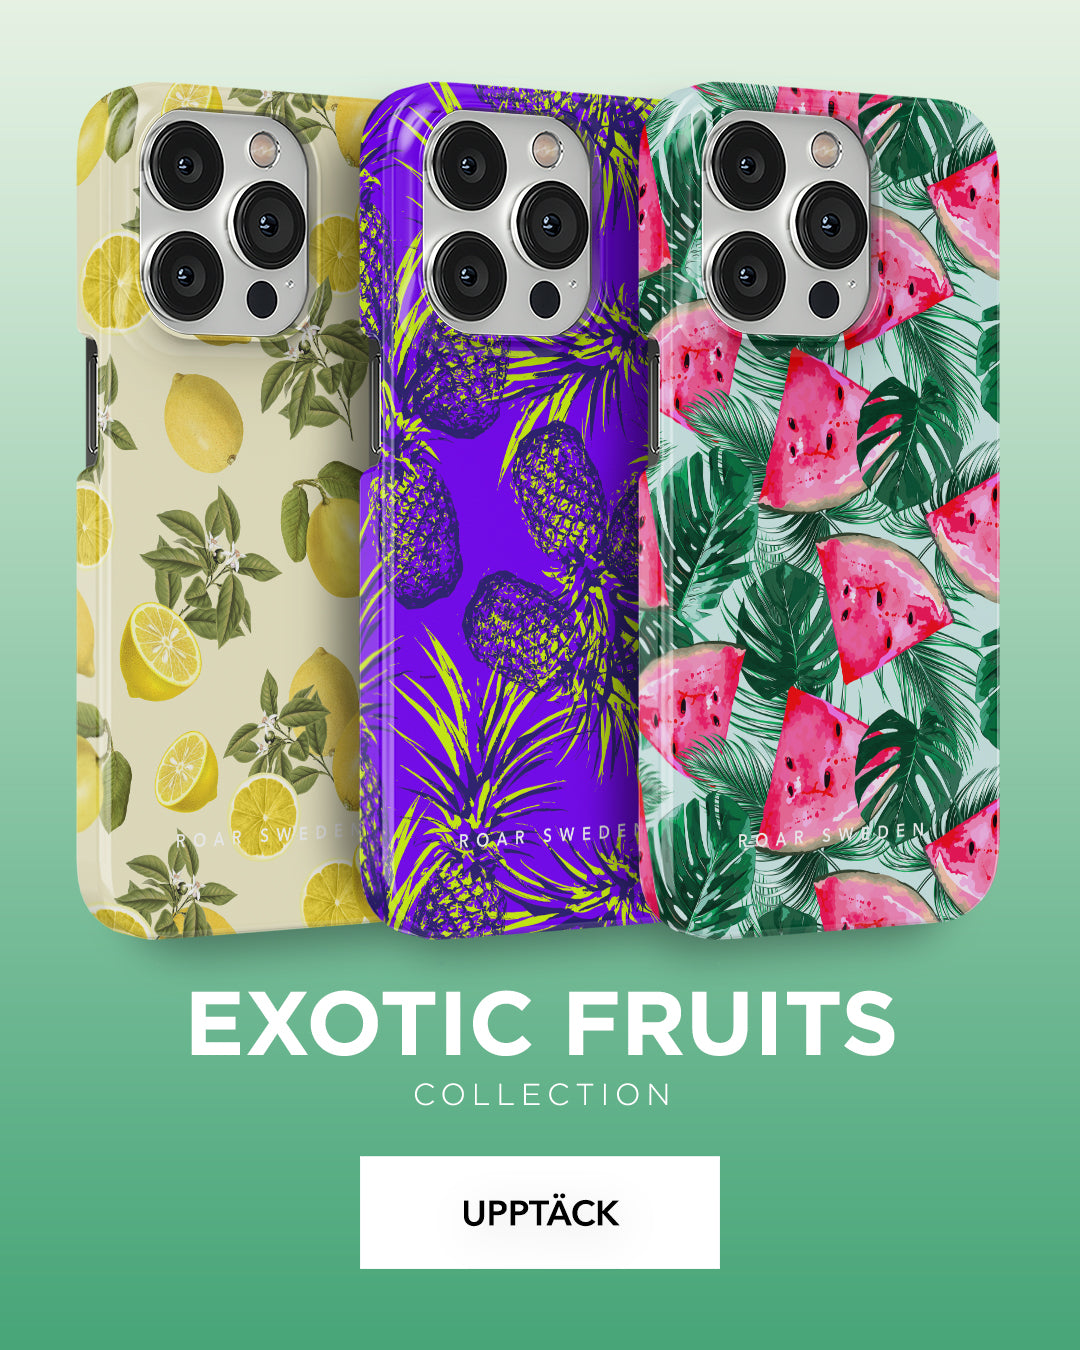 Three phone cases with exotic fruit designs: lemons, figs, and watermelons, displayed next to the text "exotic fruits collection.